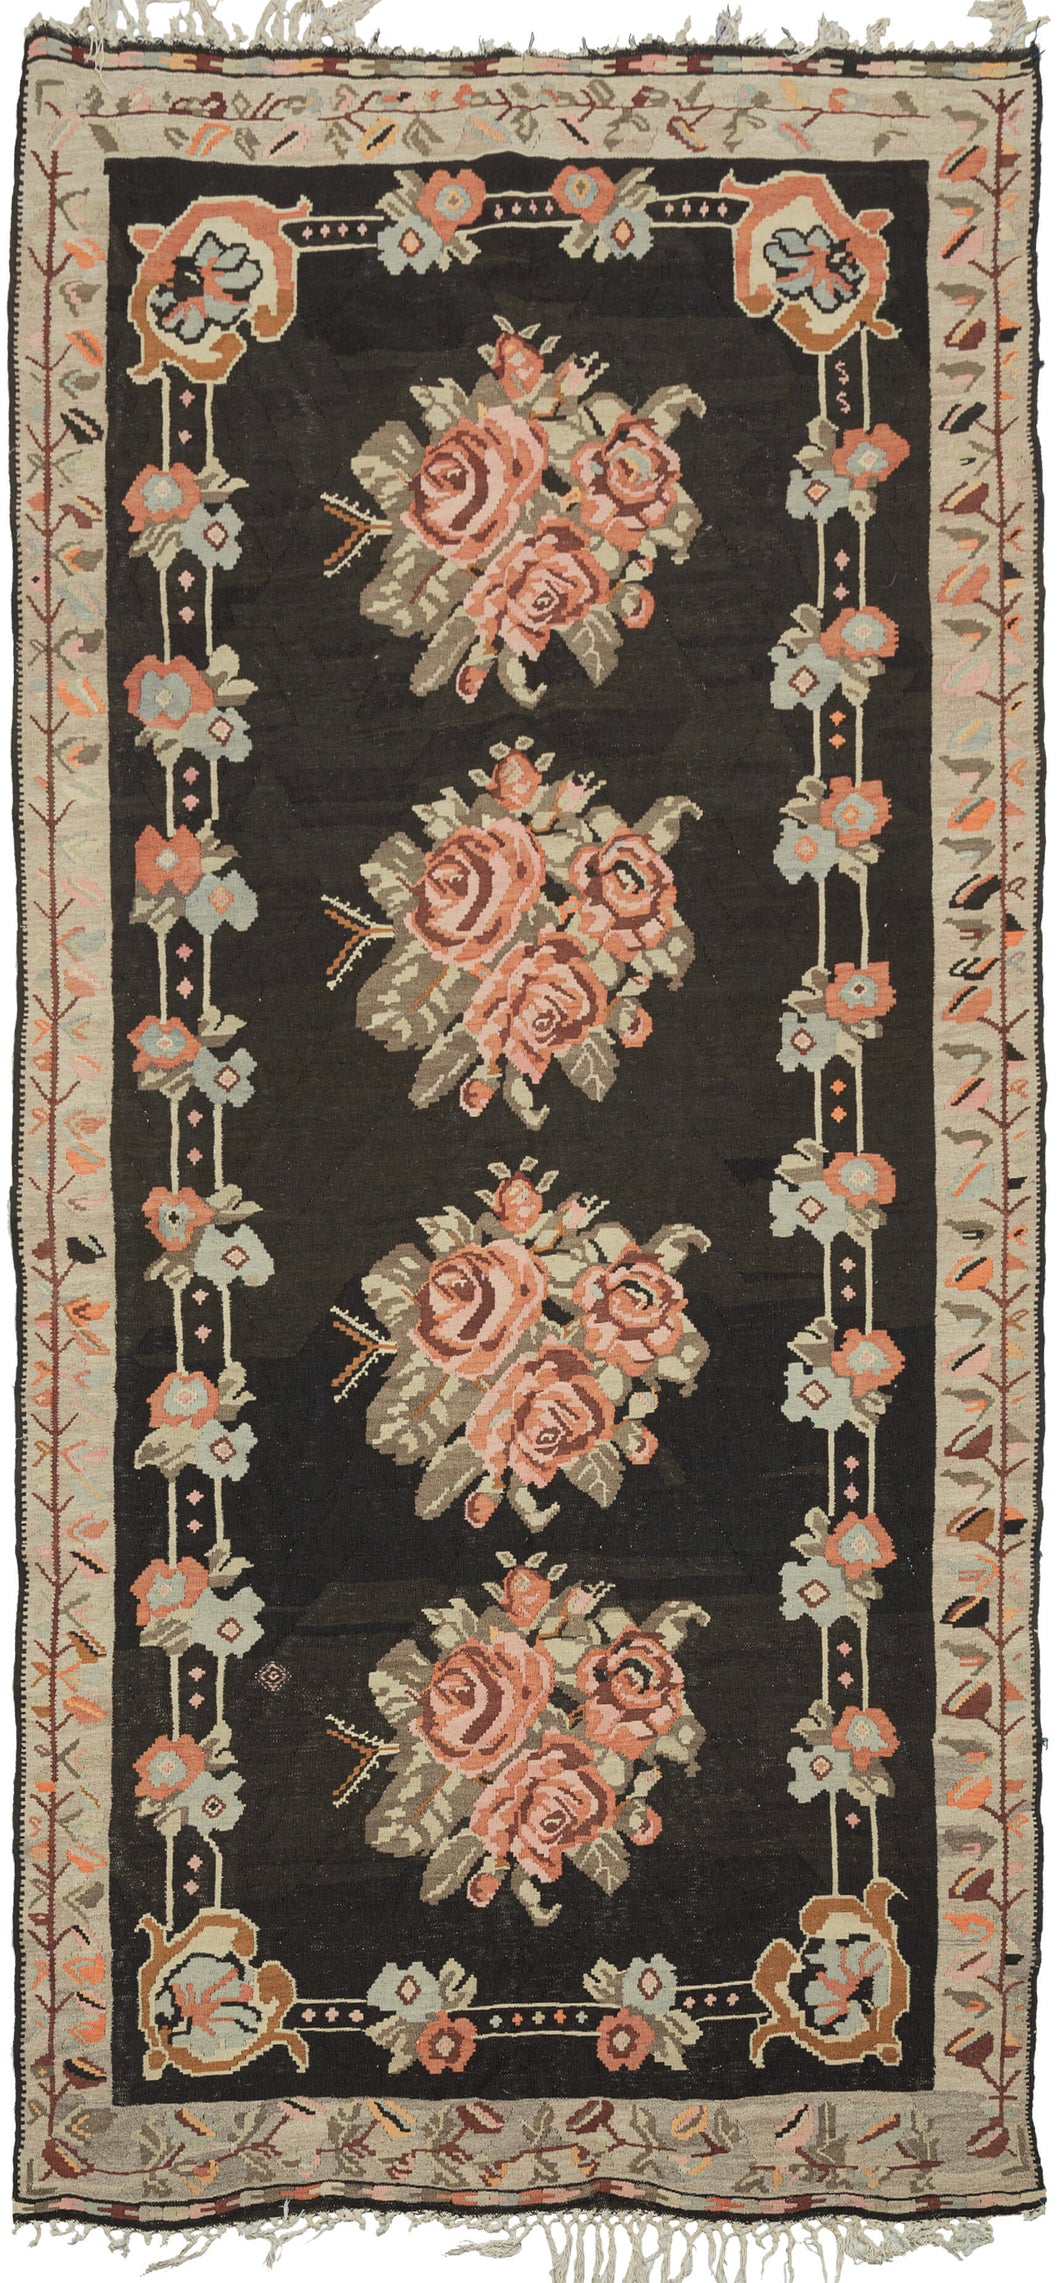 This Bessarabian kilim features four bouquets plush cabbage roses in maroon, orange and soft pink on a deep brown, almost black field. It has a small inner frame of pairs of simpler flowers on a track with c scroll cornices. The proper outer border features a scrolling view with various leaves in bright oranges, slate and soft pinks on a camel ground. 